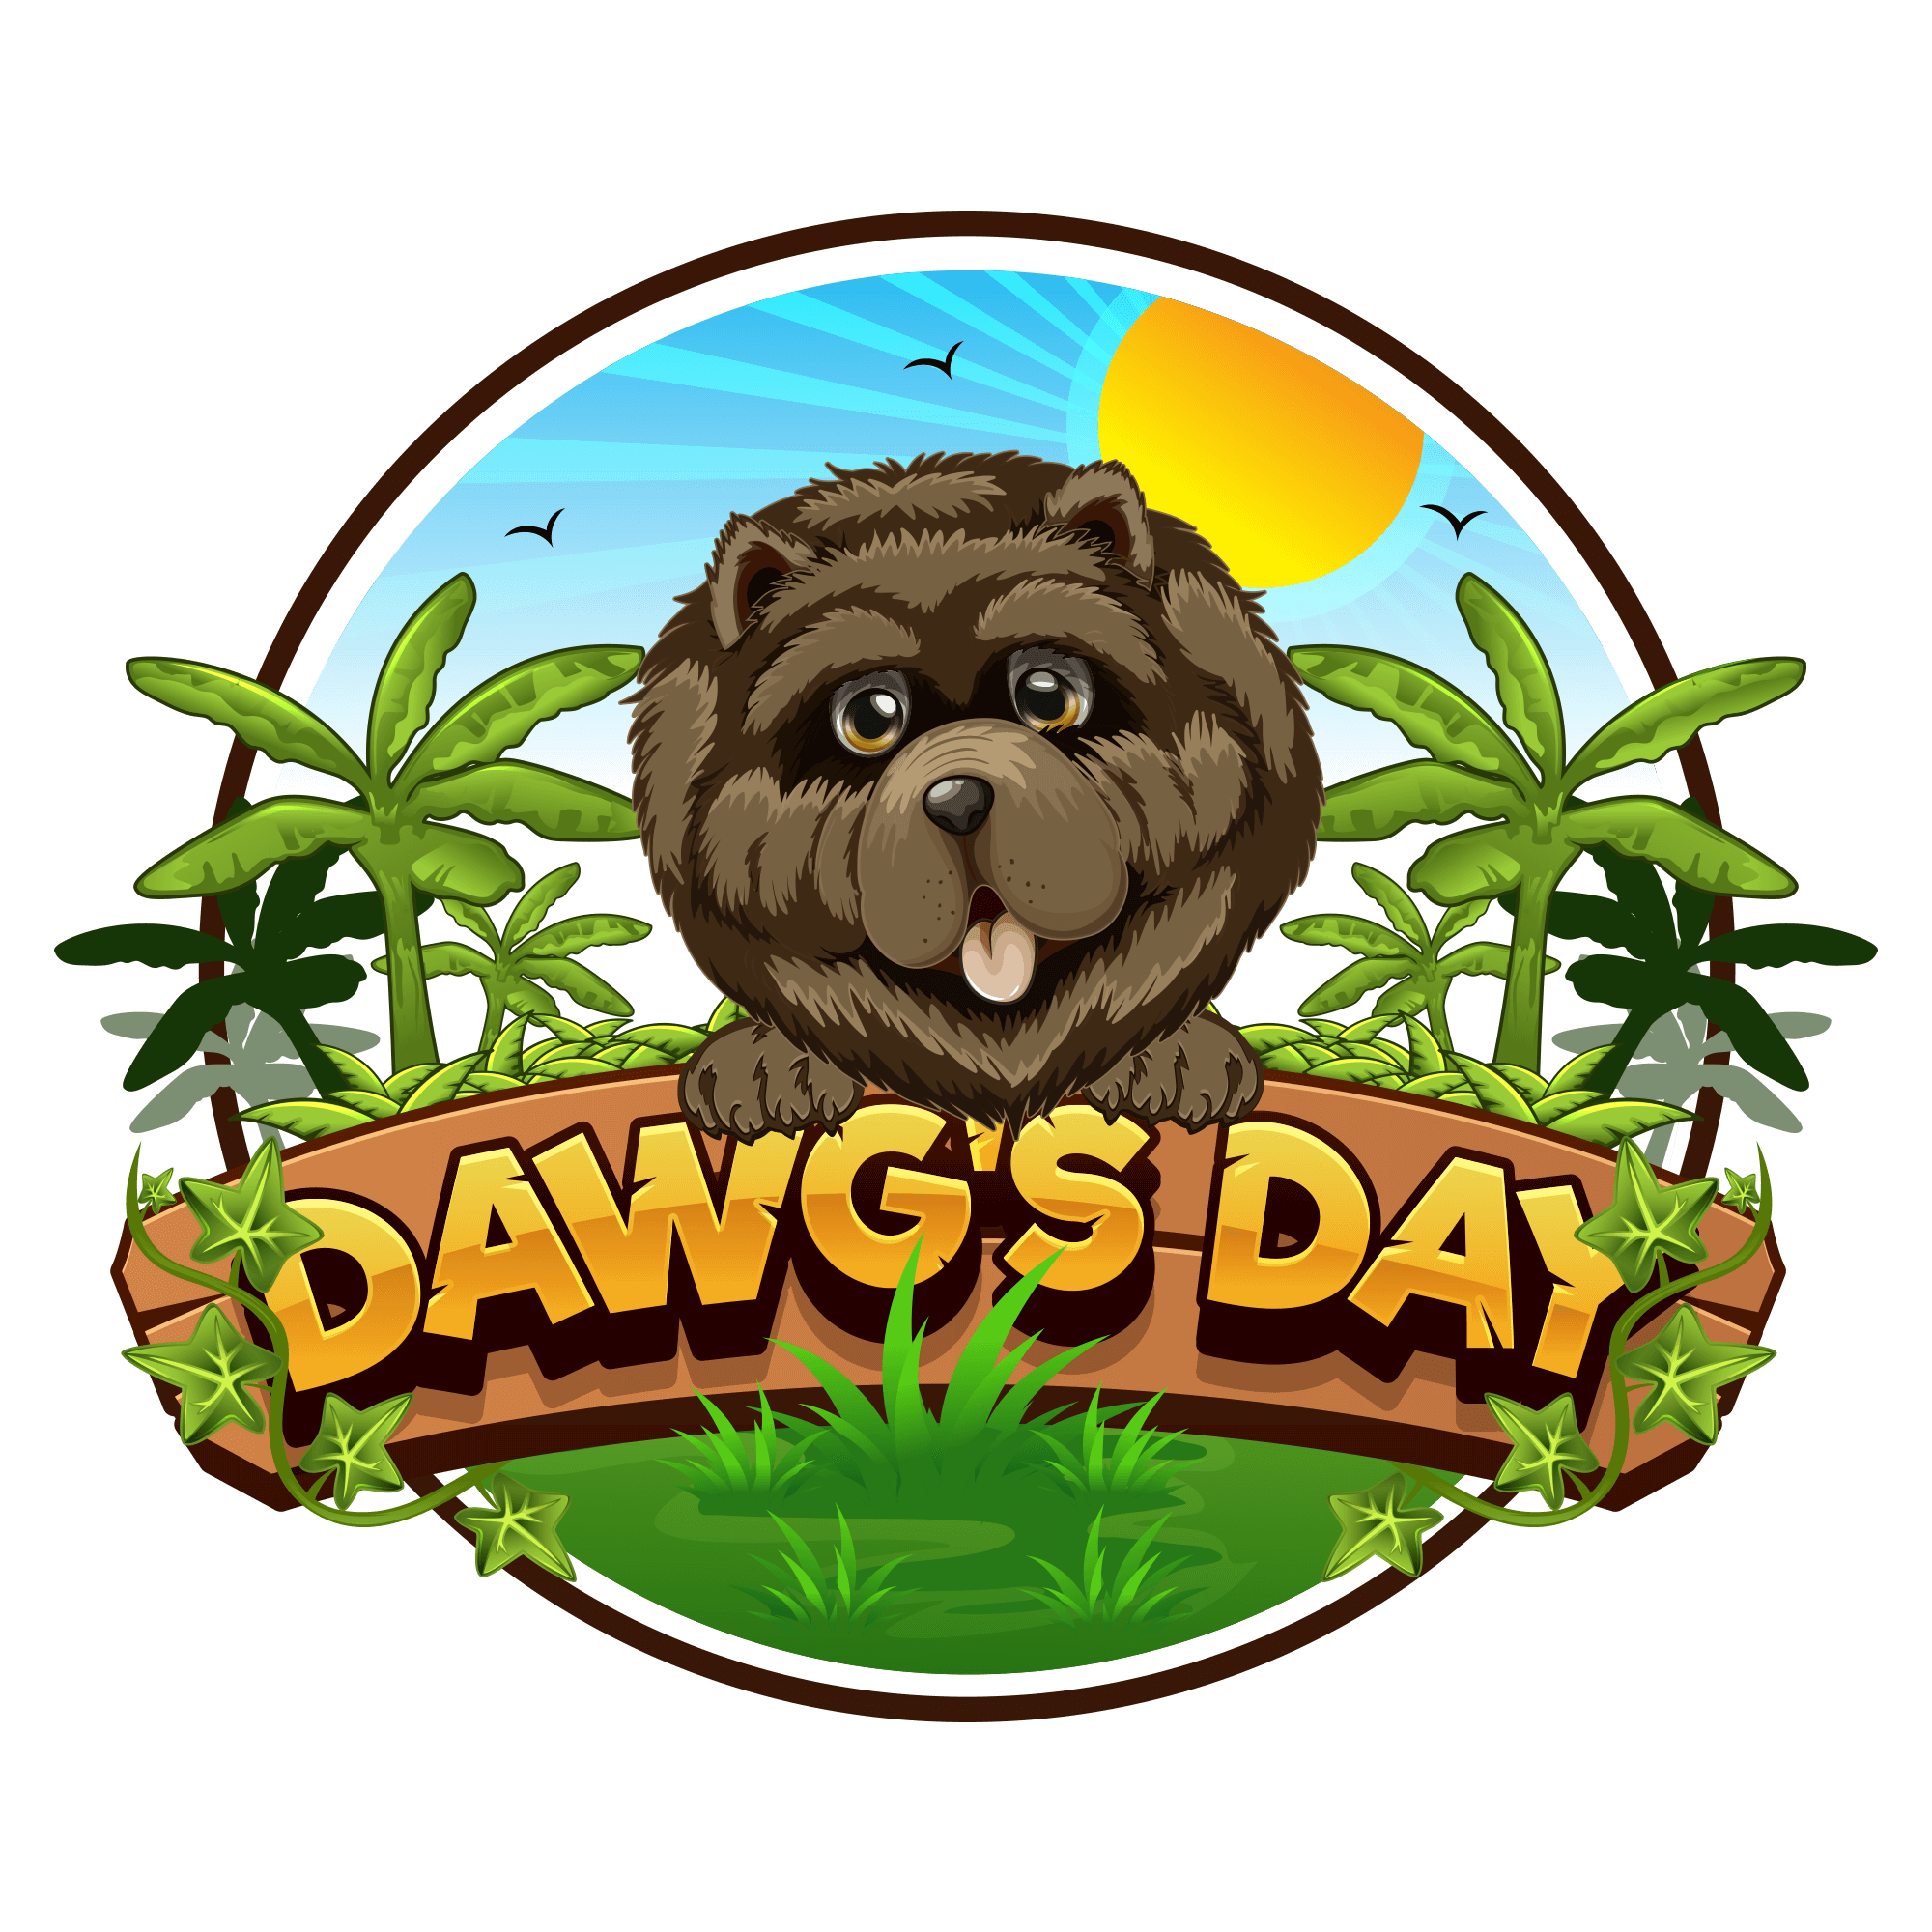 Dawg's Day NFT